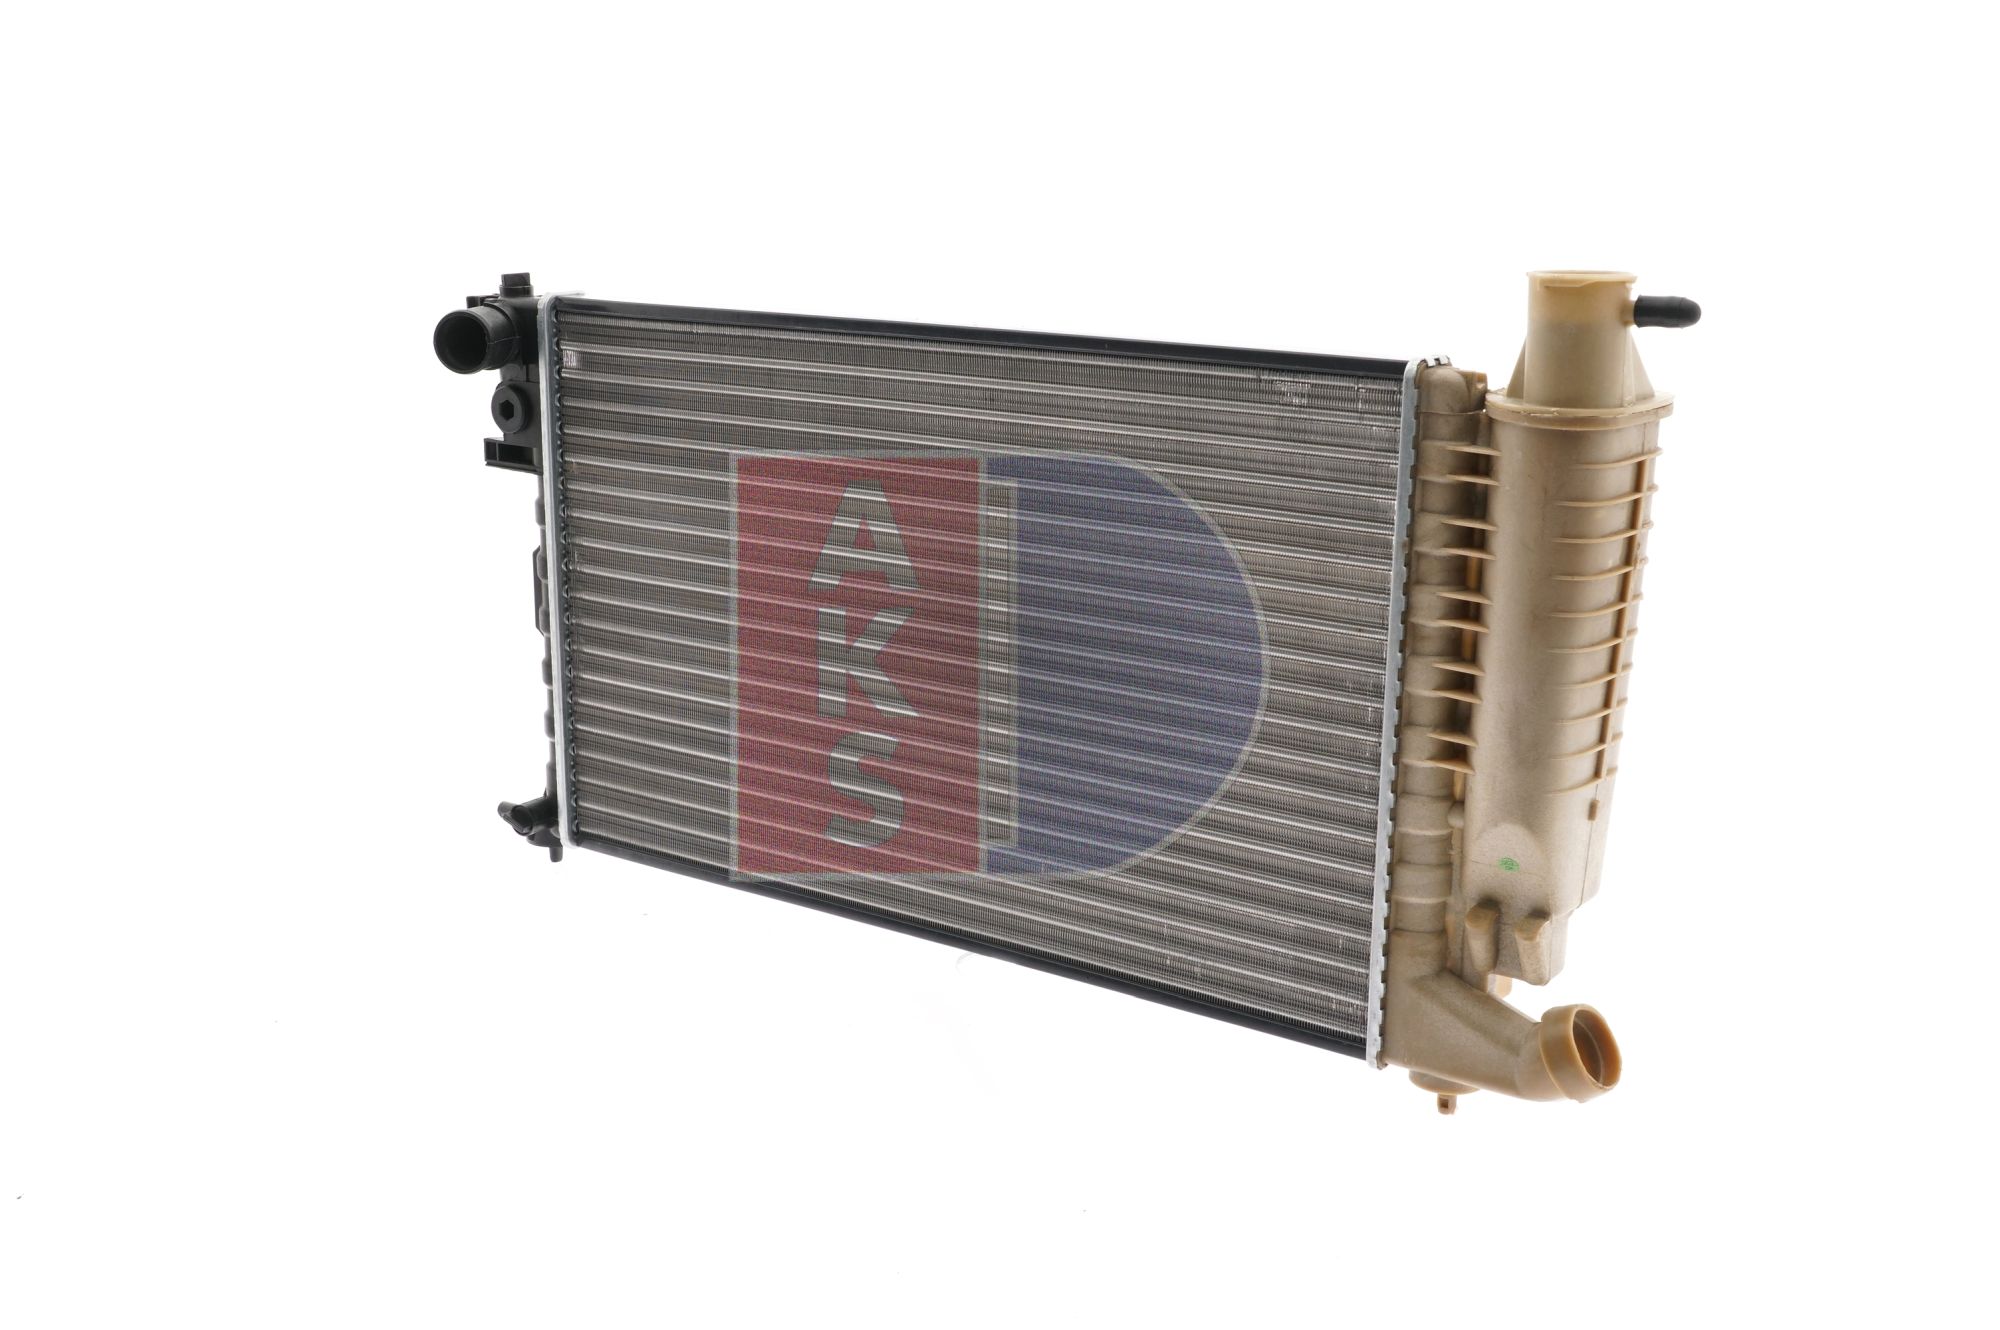 AKS DASIS 160025N Engine radiator 610 x 377 x 23 mm, Mechanically jointed cooling fins